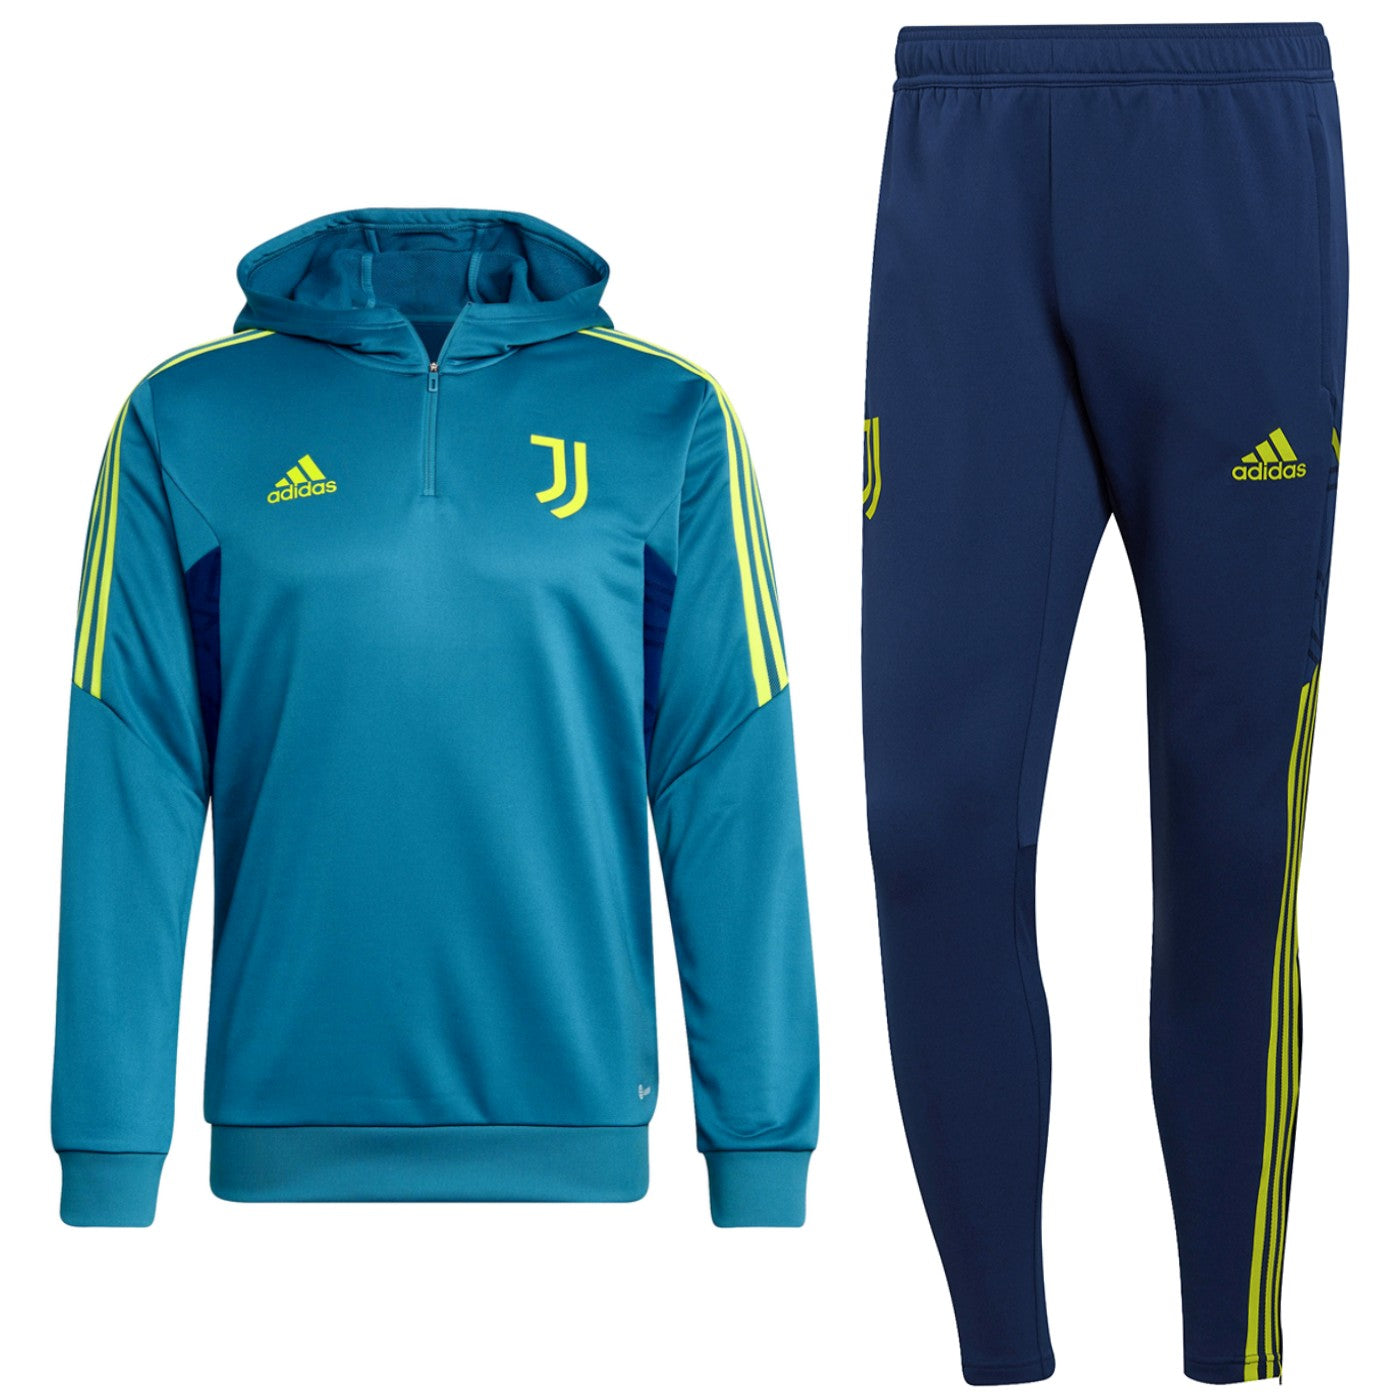 Open fundament humor Juventus hooded training technical soccer tracksuit 2022/23 - Adidas –  SoccerTracksuits.com